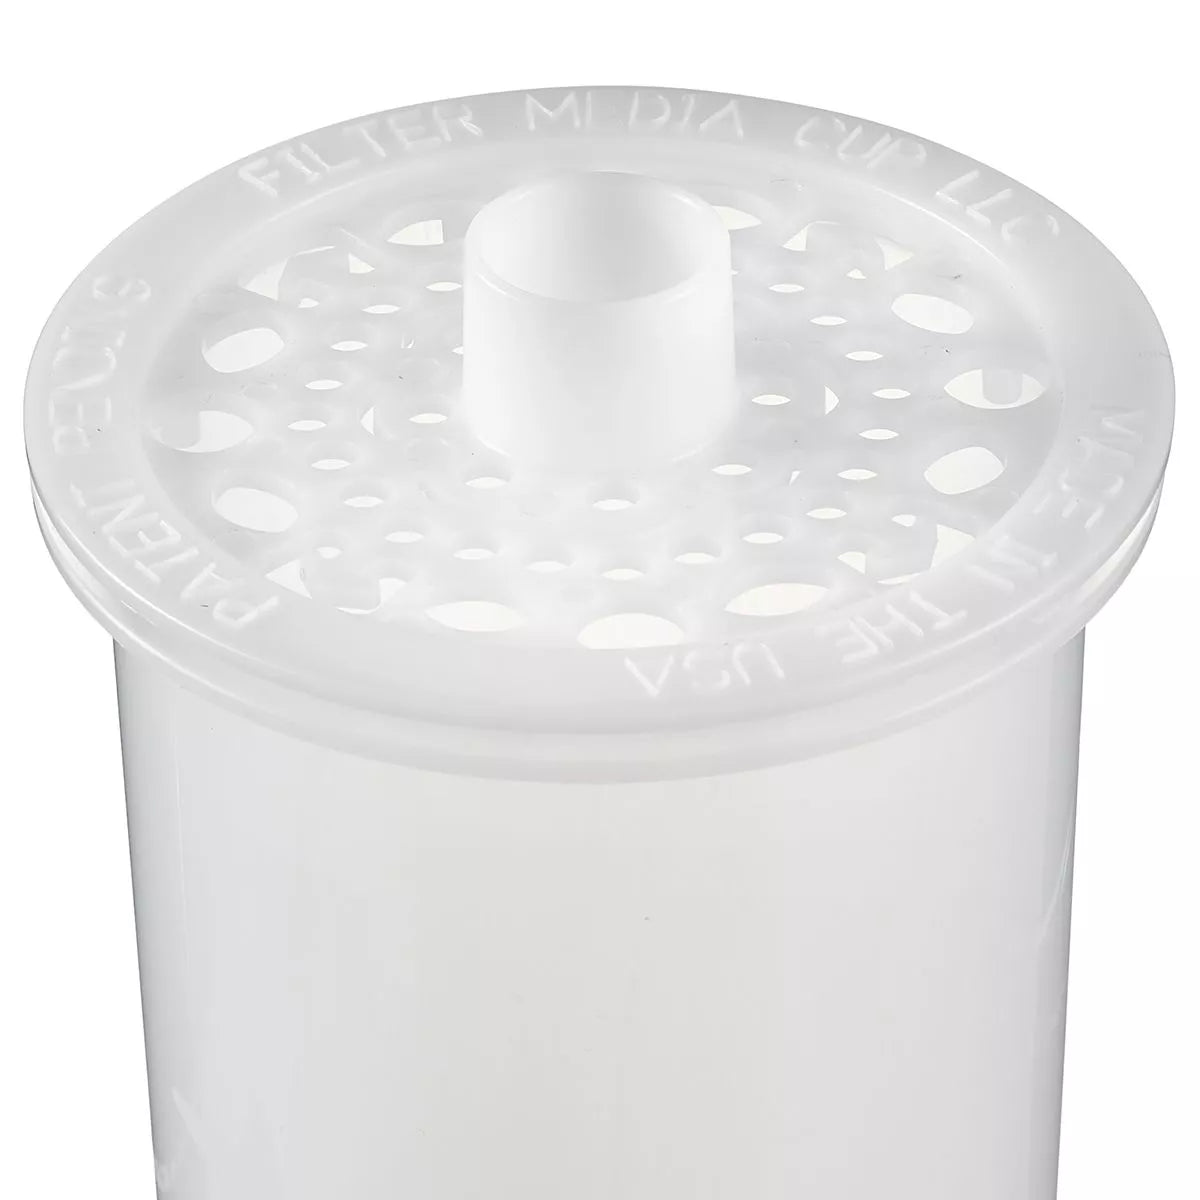 Filter Media Cup Silencer (Lid Only) - Sea Foam White - 4 inch - Media Cup